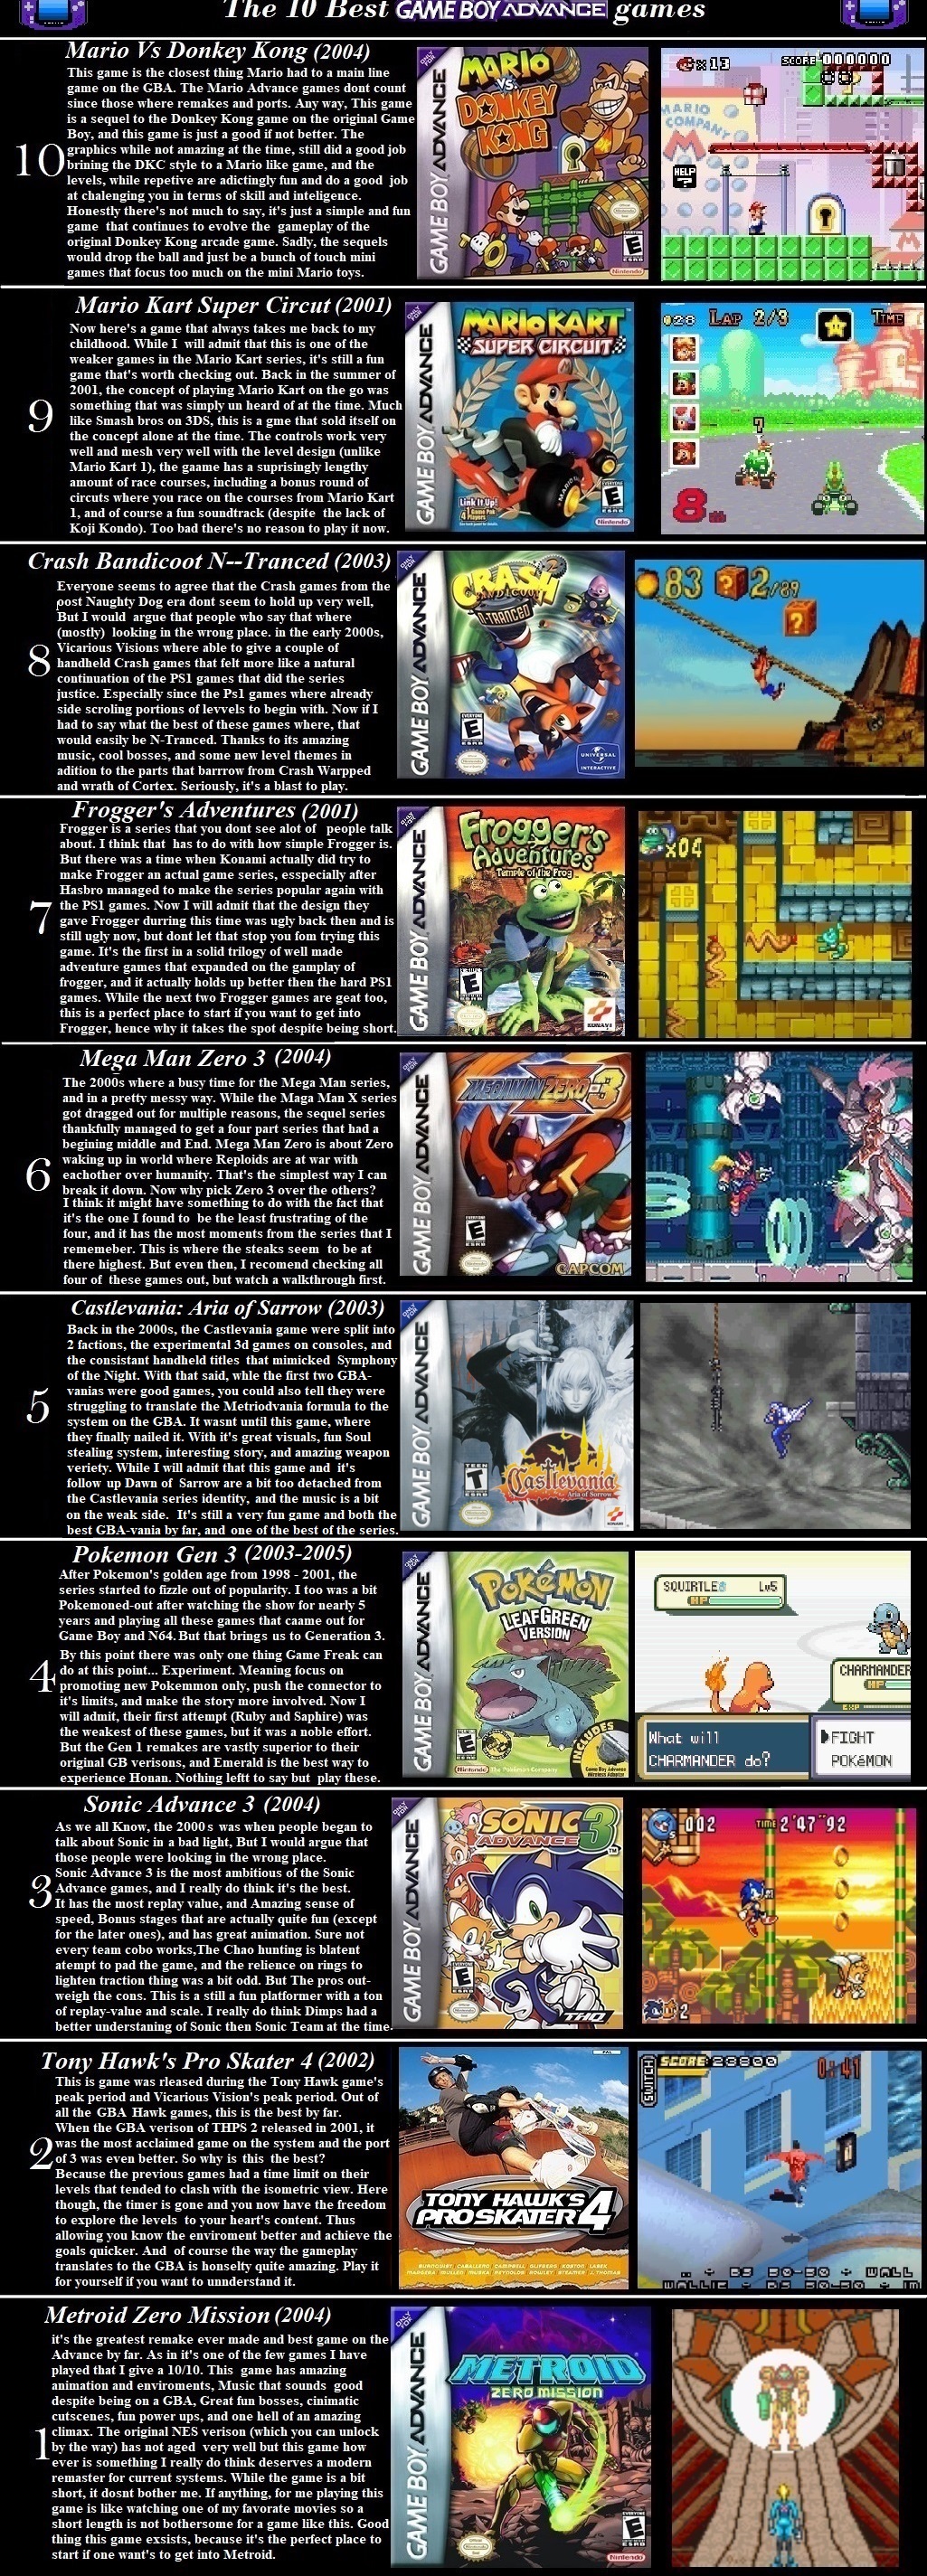 Palads Sorg bladre Top 10 GBA games by ShanahaT on DeviantArt